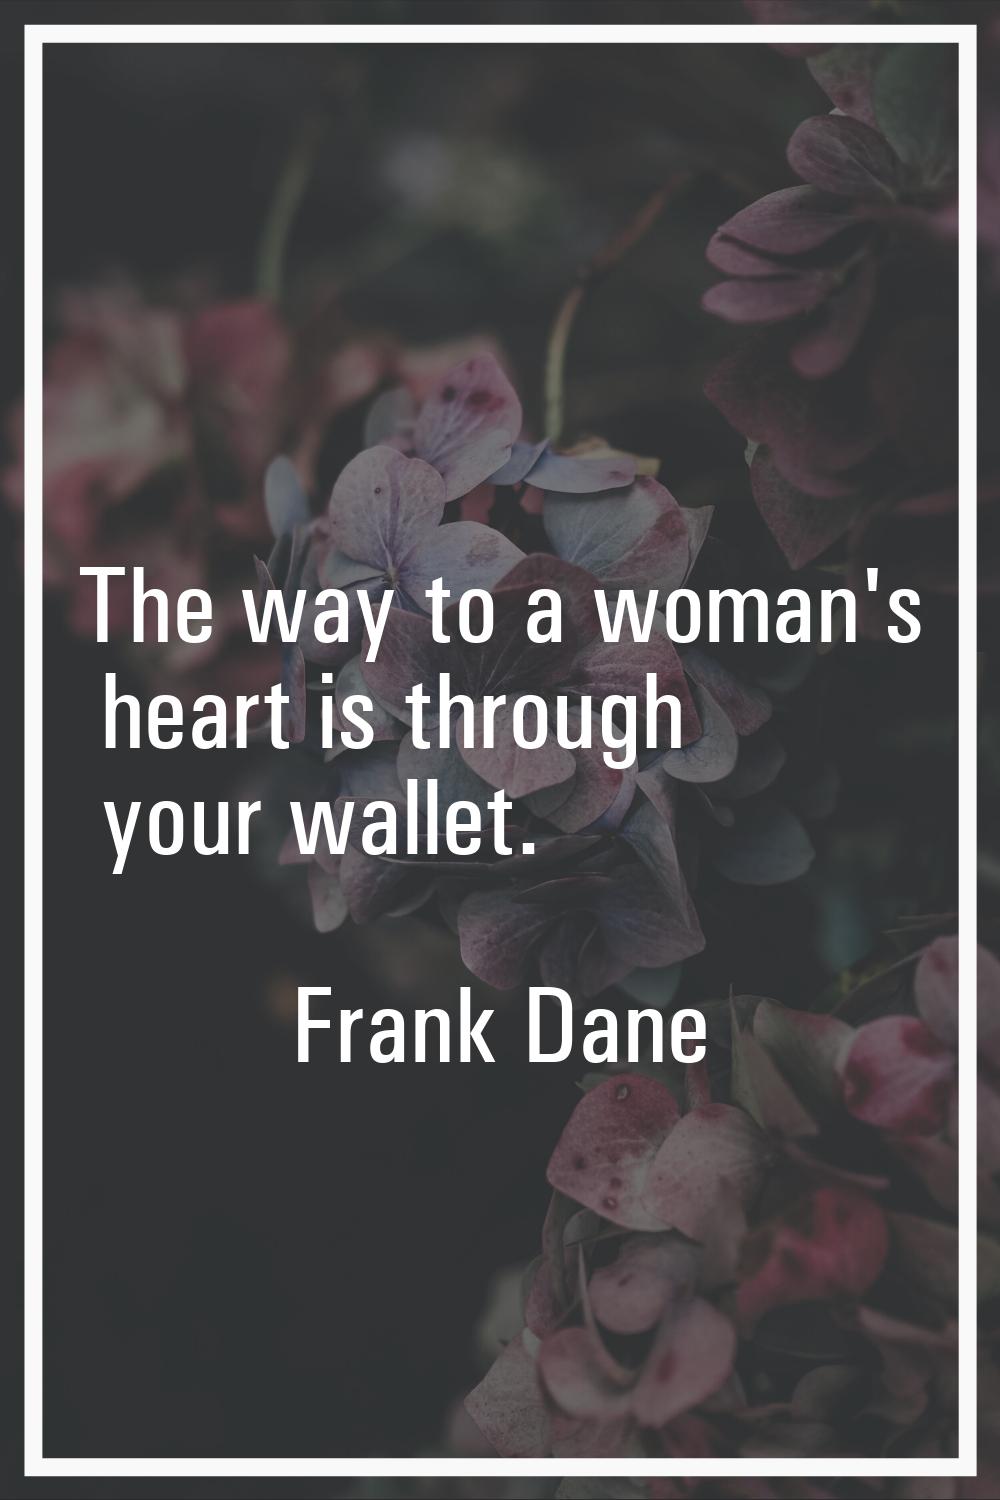 The way to a woman's heart is through your wallet.